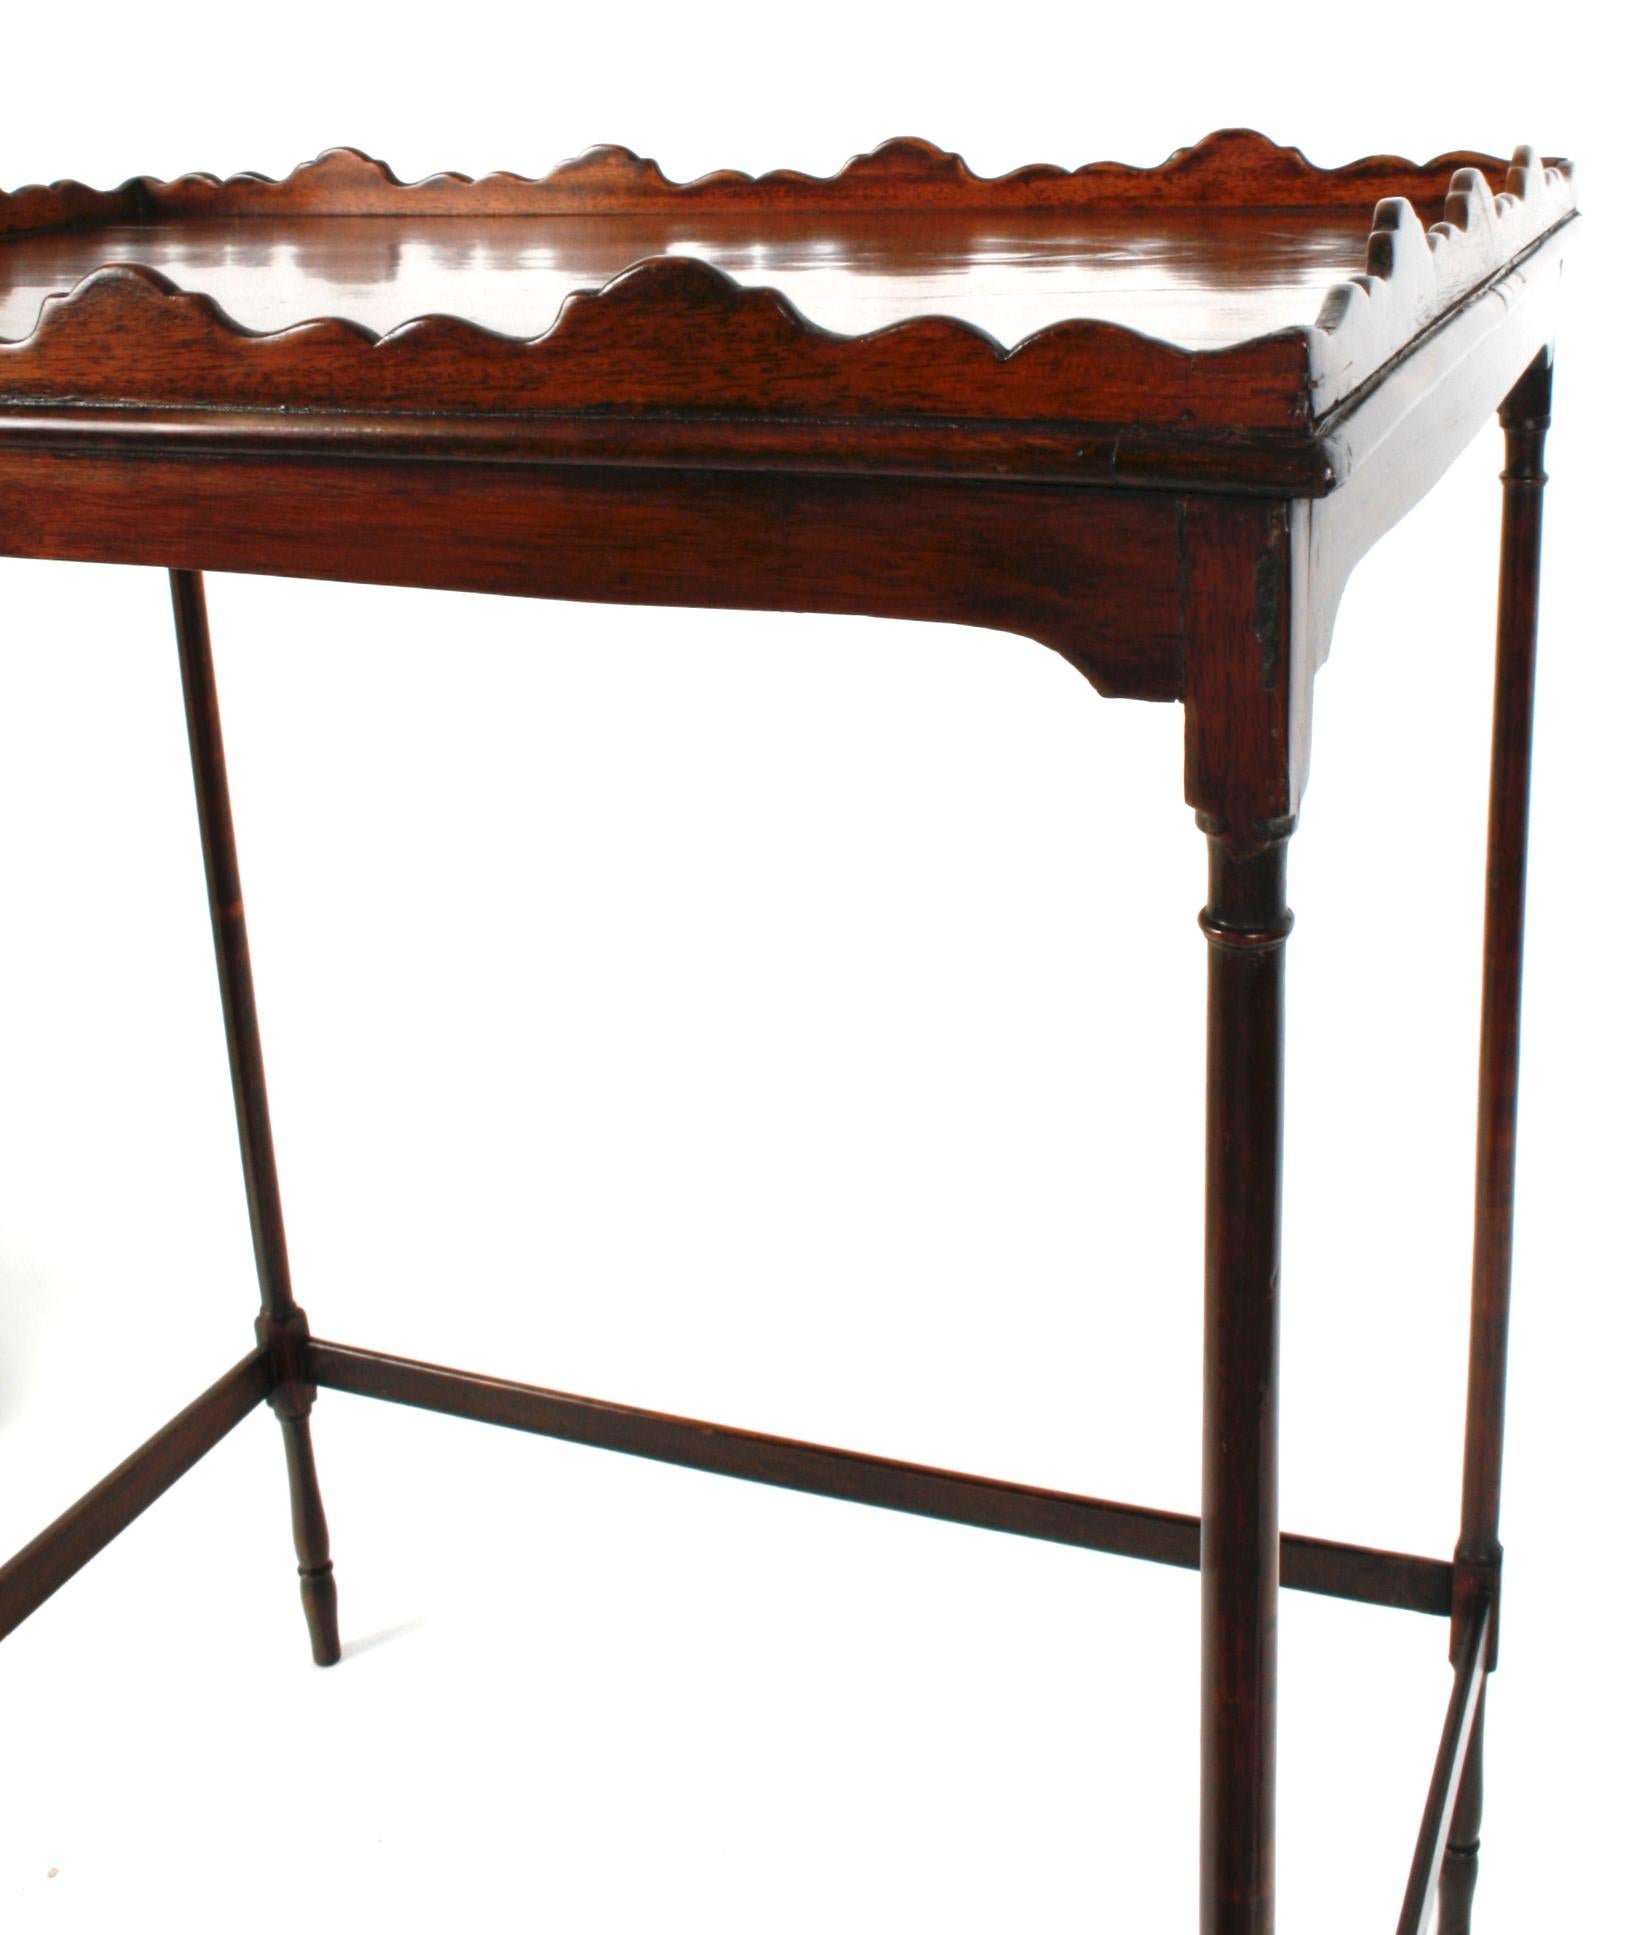 George III Spider Leg Mahogany Silver/Tea Table with Scalloped Gallery, c1780 In Good Condition For Sale In valatie, NY